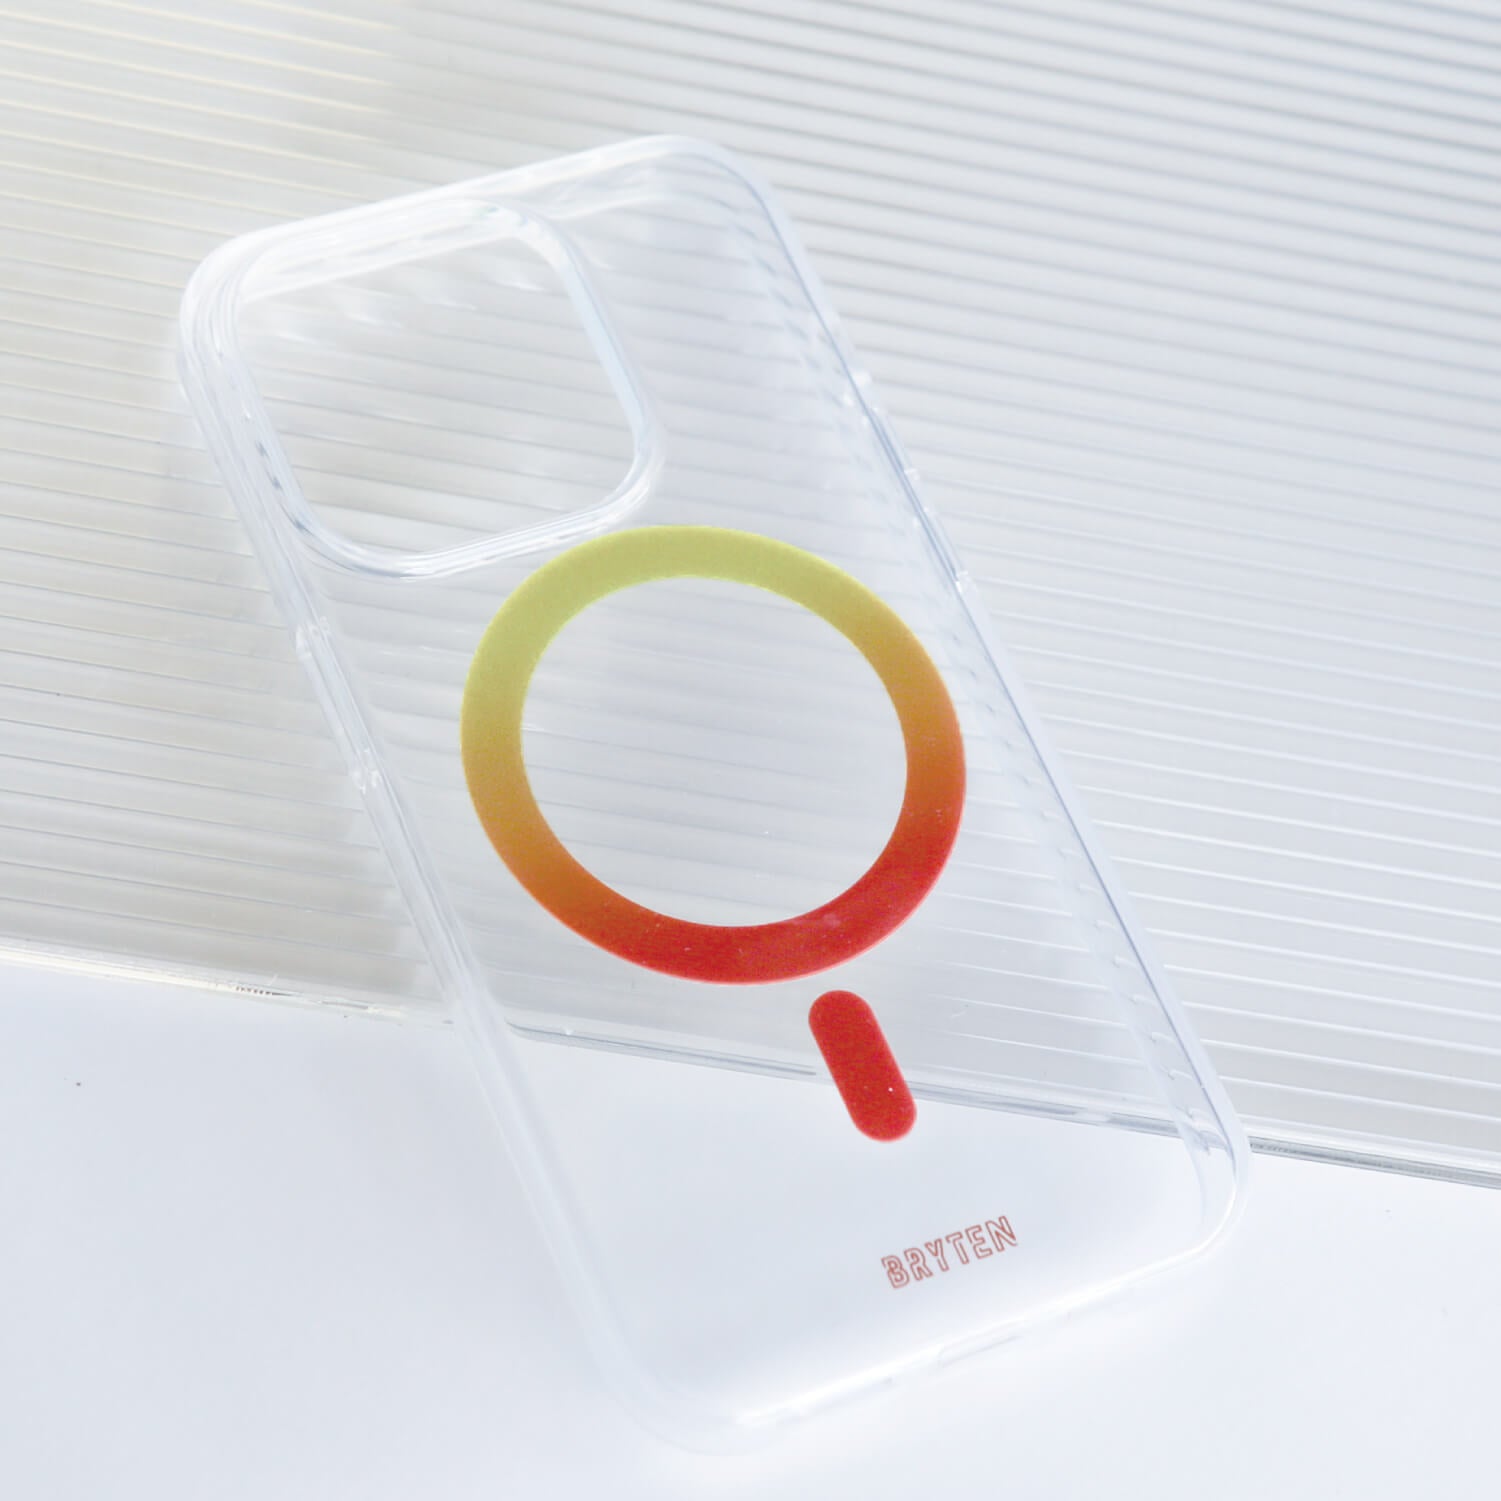 A clear iPhone 15 MagFx MagSafe case with a vibrant logo incorporating red, yellow, and blue colors - Bryten by Raptic.